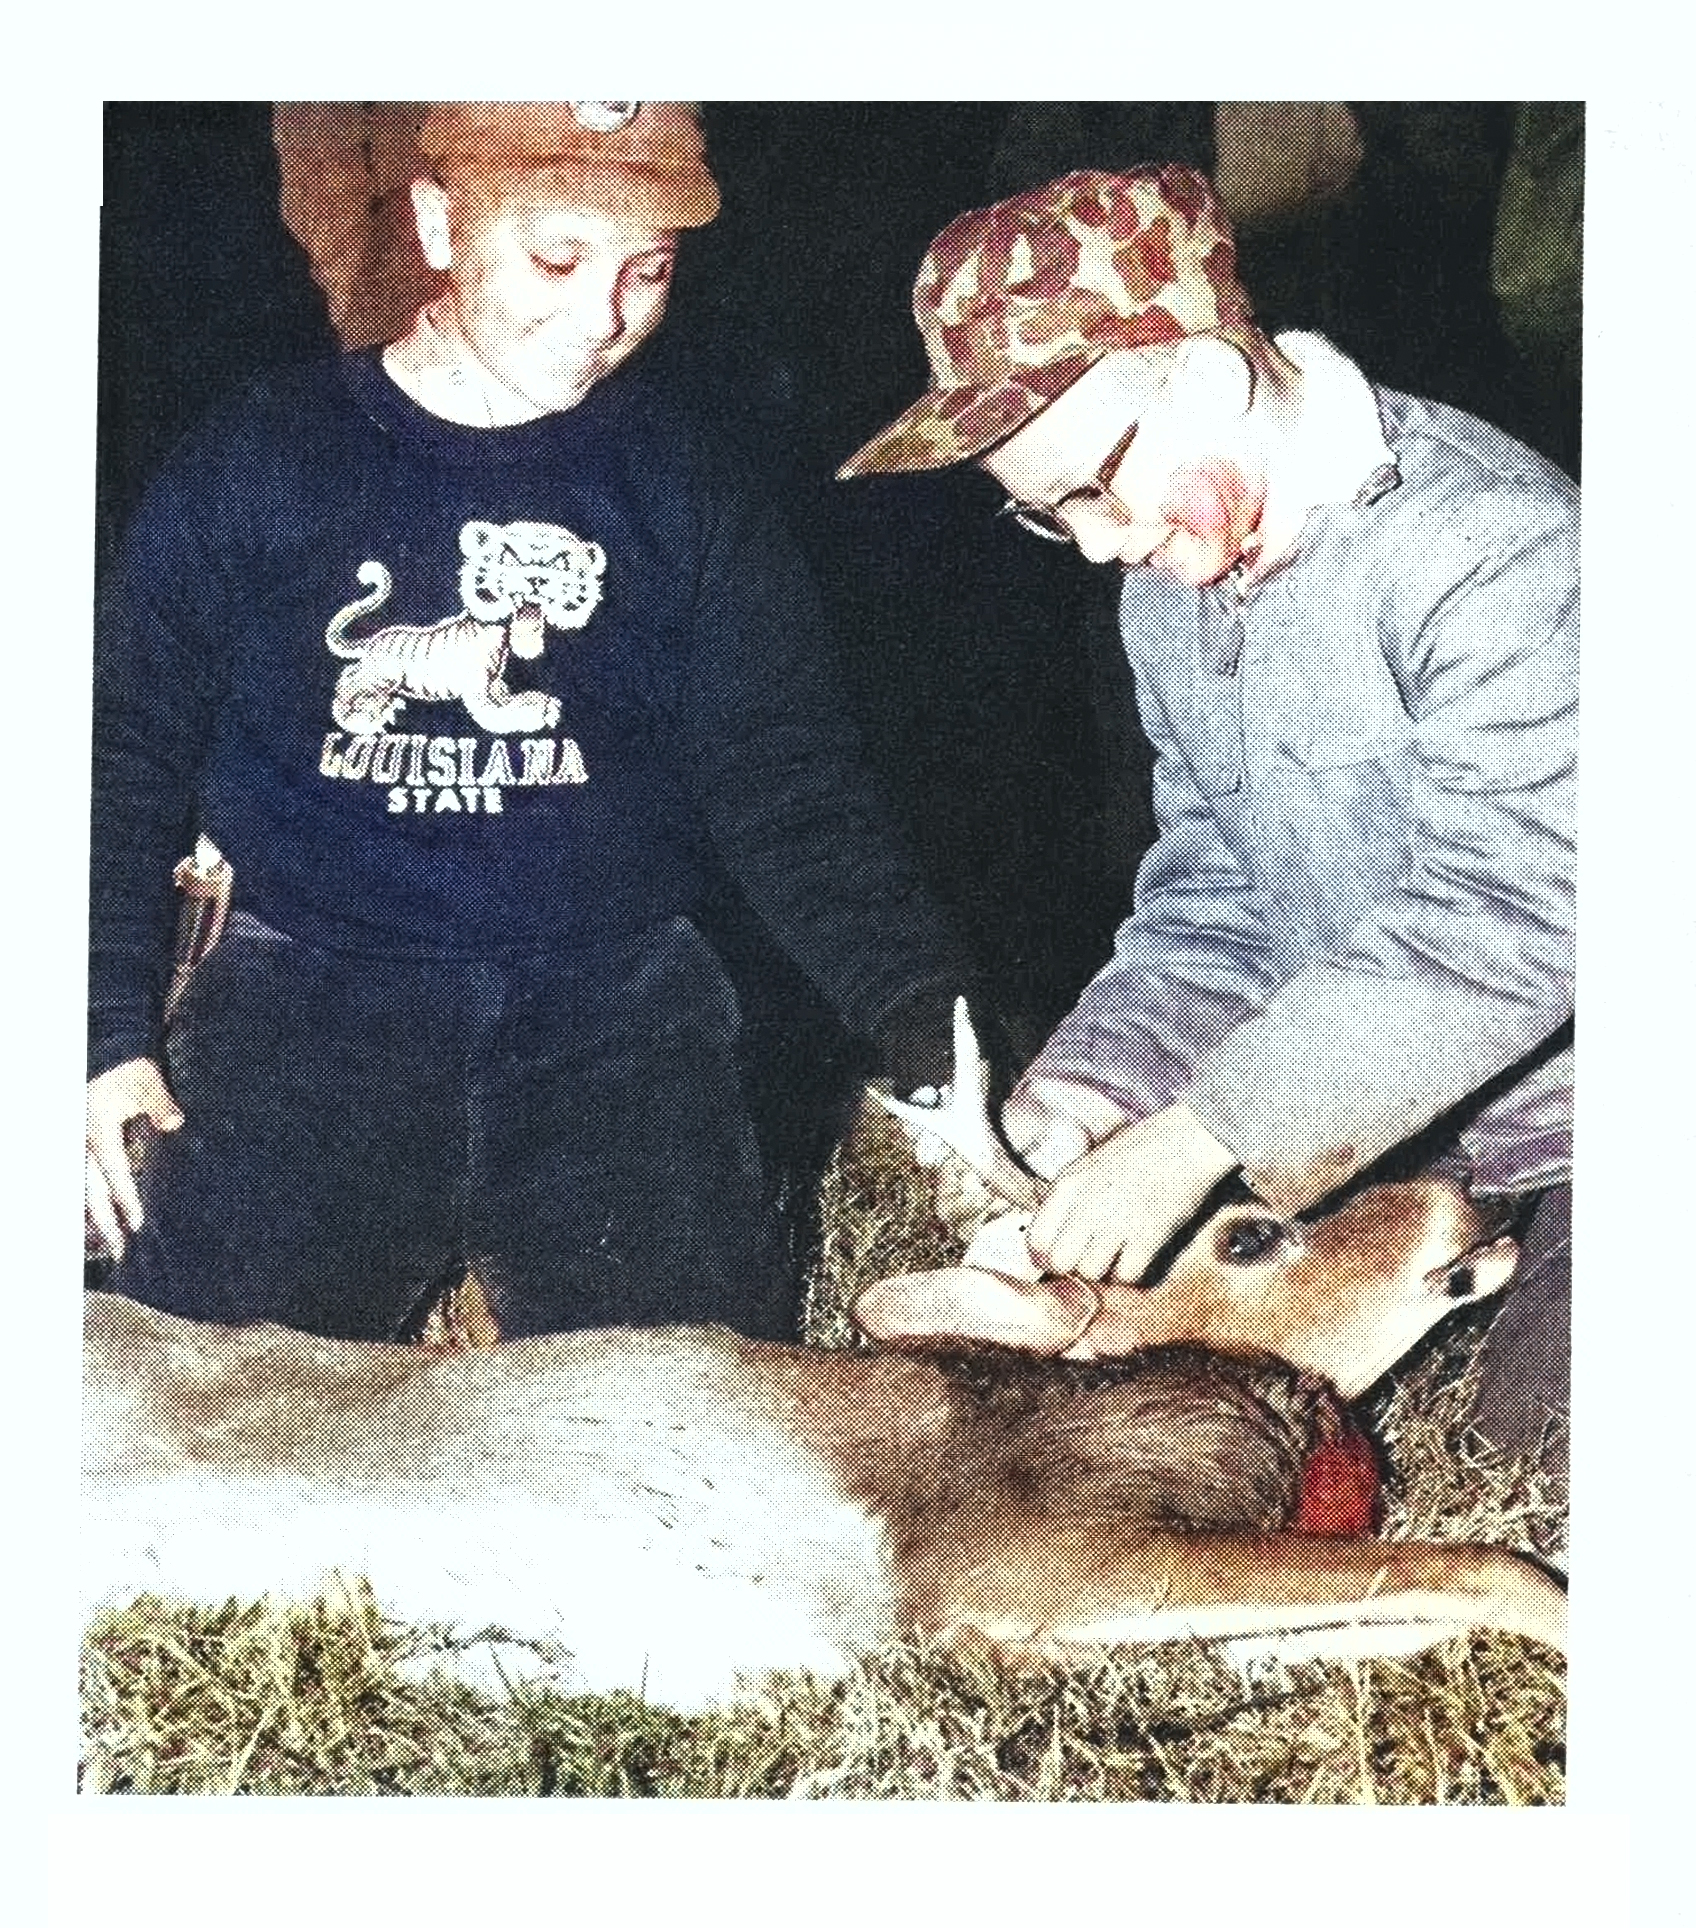 My Son’s First Trip to Deer Camp Was a Rite of Passage—for Both of Us